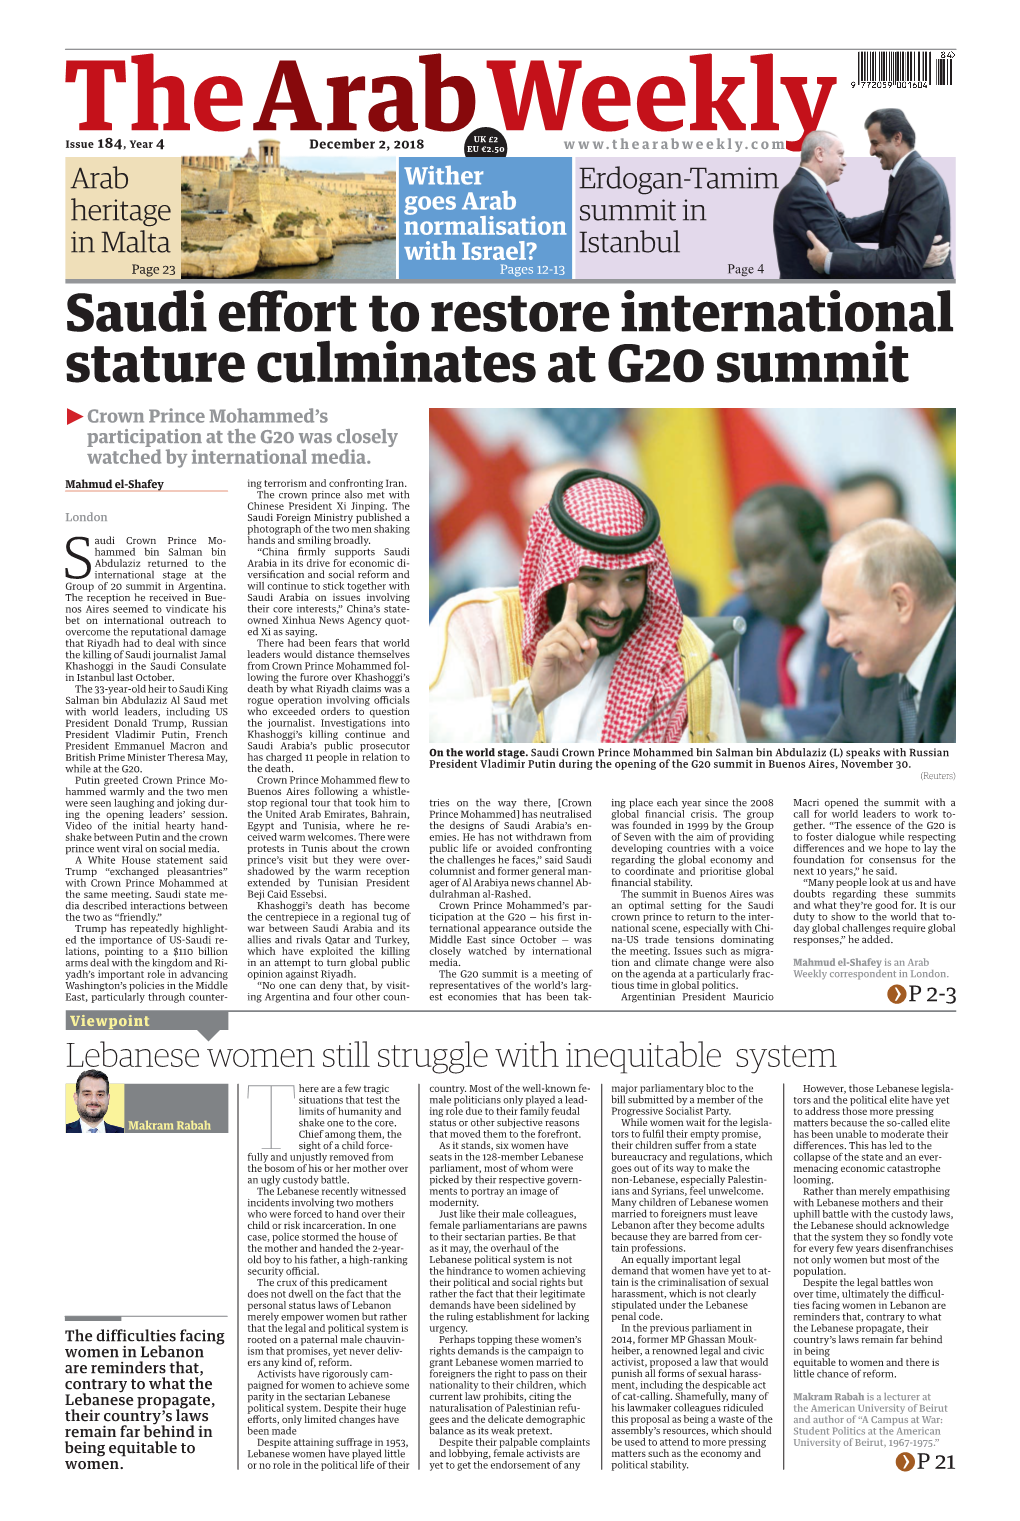 Saudi Effort to Restore International Stature Culminates at G20 Summit ► Crown Prince Mohammed’S Participation at the G20 Was Closely Watched by International Media